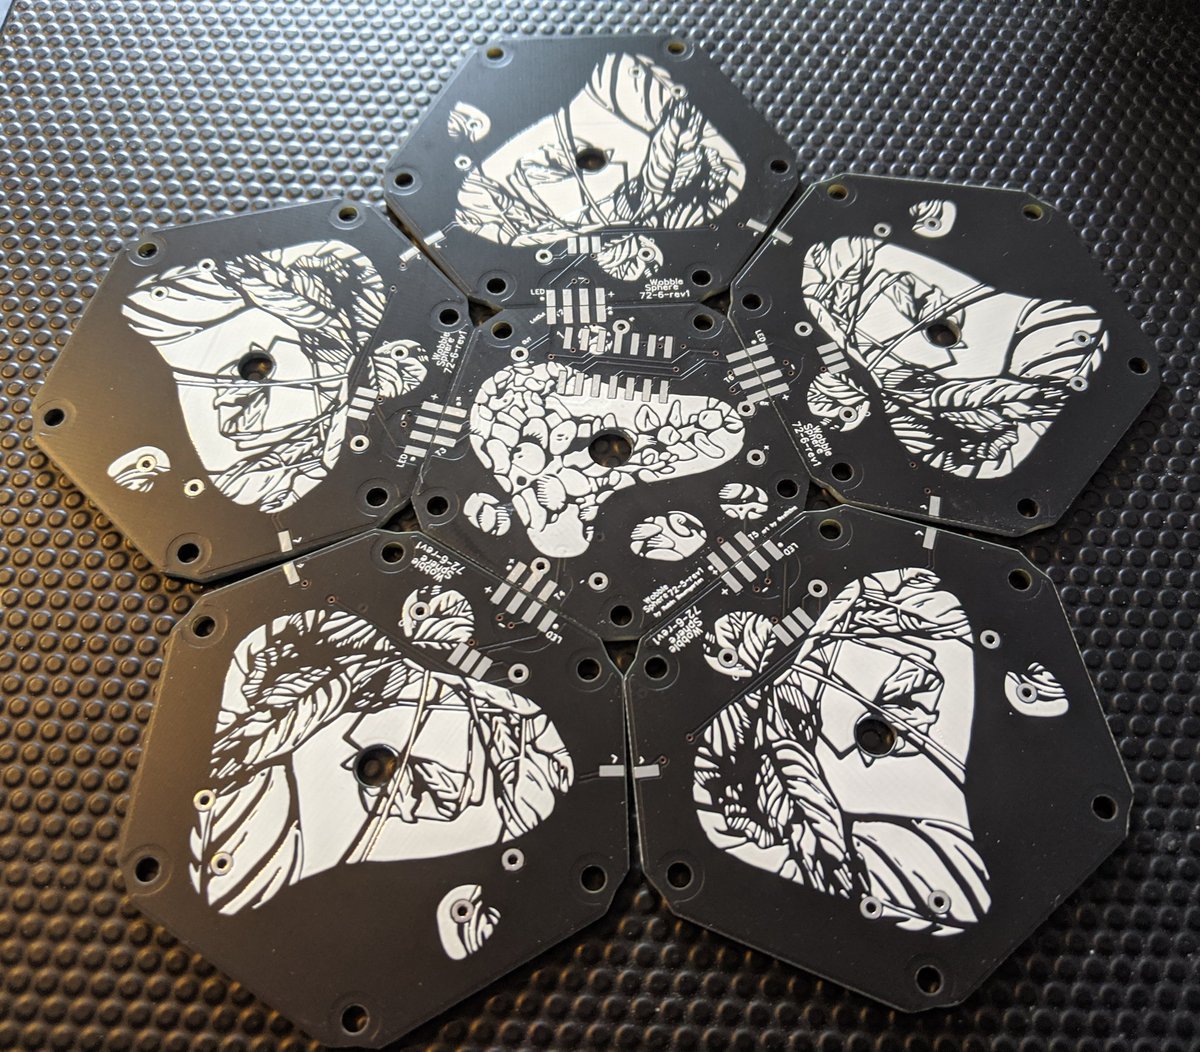 The PCBs I designed for the Wobble Sphere just arrived!! The back sides were just blank, so I decided to ask  @caiitlinz to create small abstract drawings for them. They came out so well! Once assembled these faces are hidden, like little art Easter eggs 